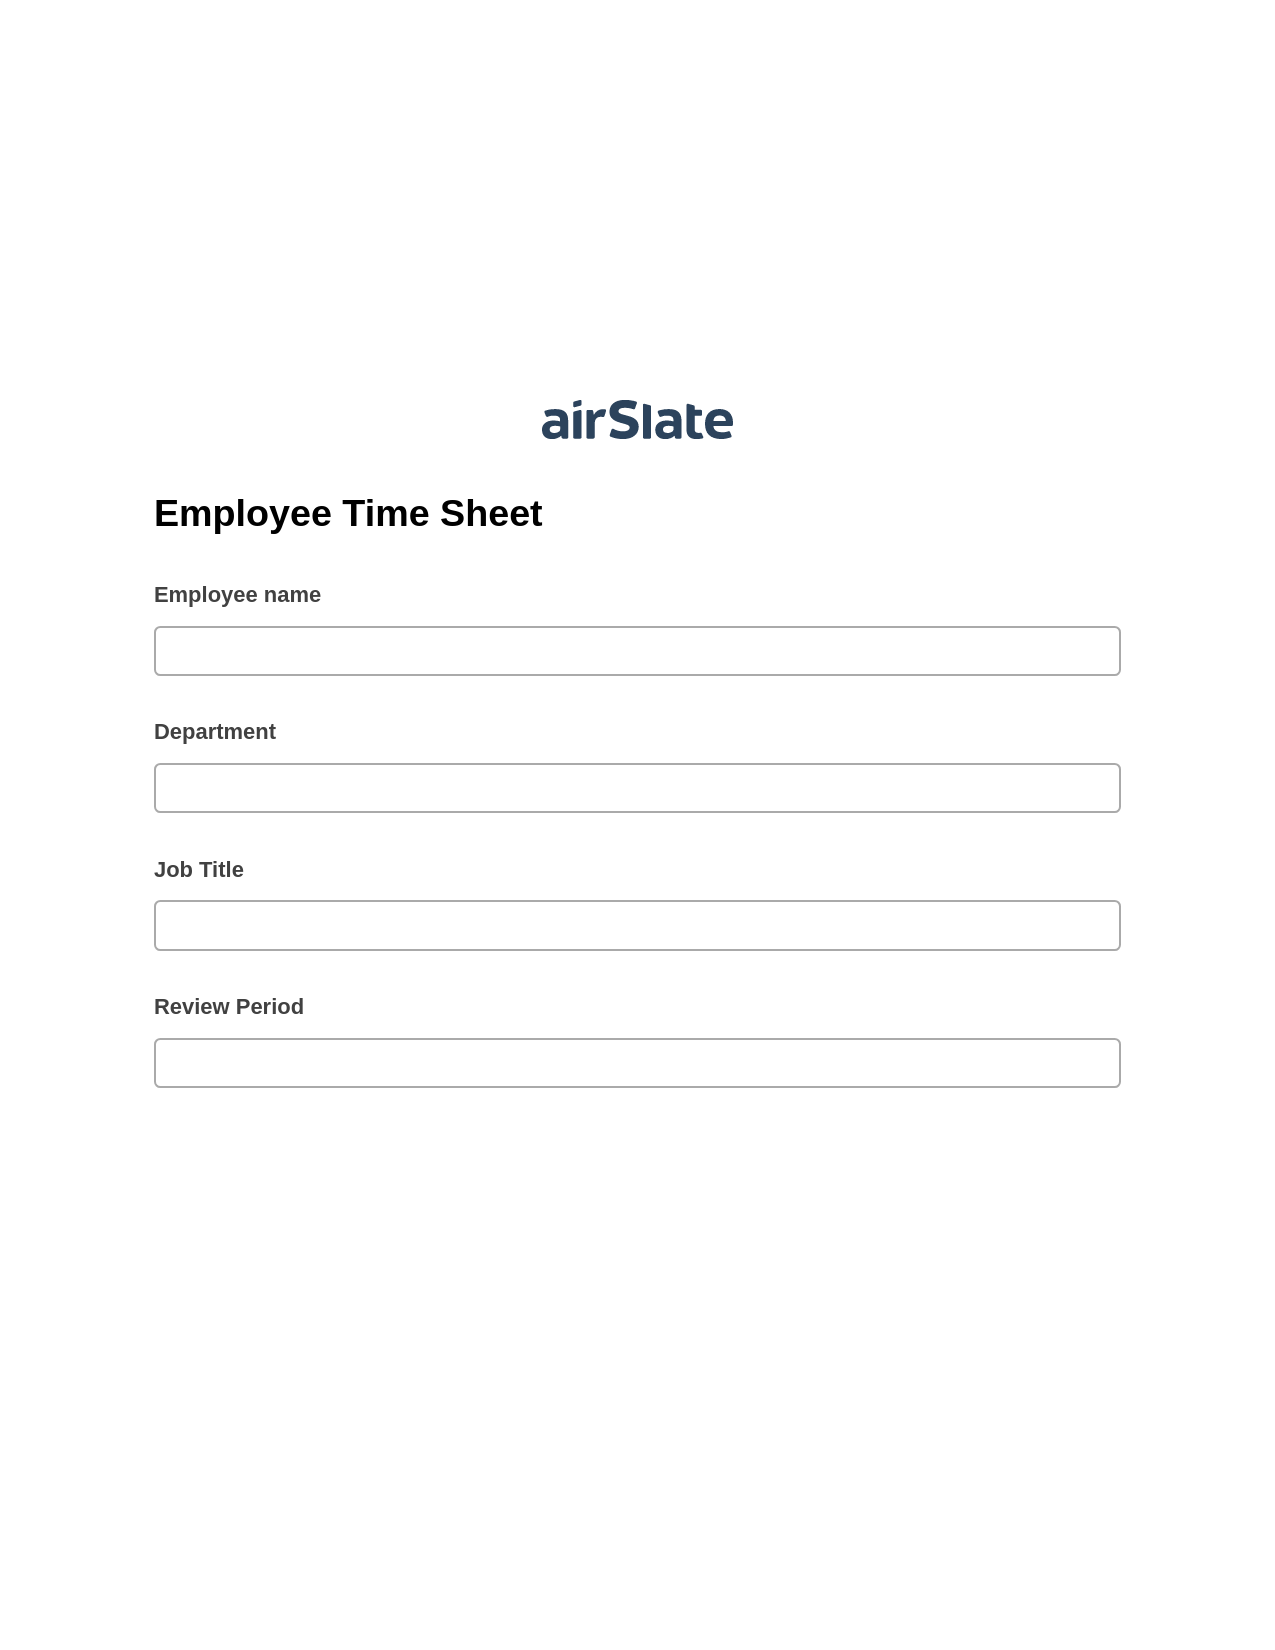 Employee Time Sheet Pre-fill Document Bot, Send a Slate to Salesforce Contact Bot, Export to Excel 365 Bot